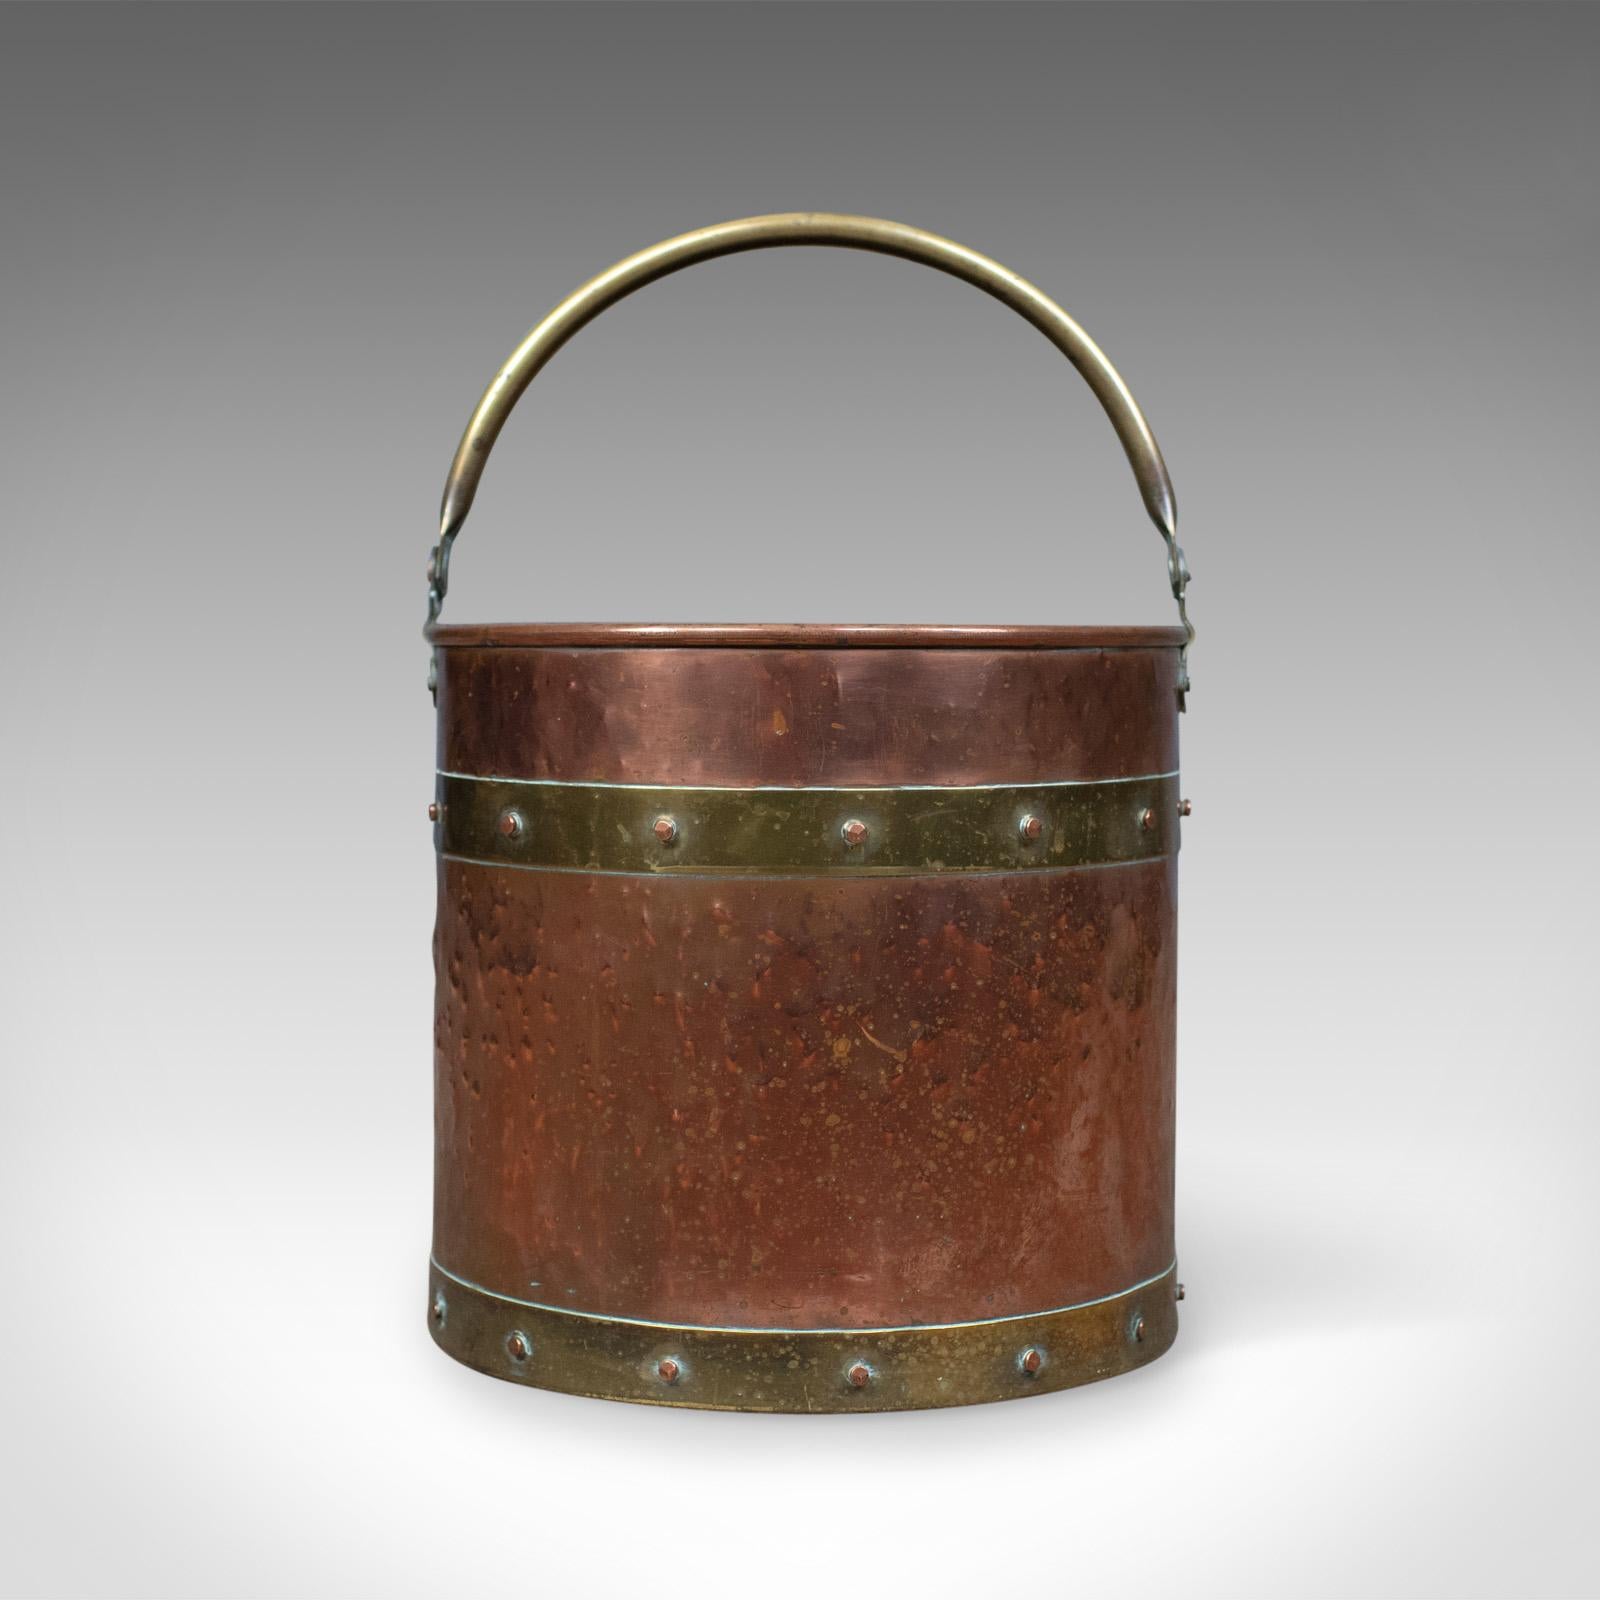 This is an antique copper coal bin, an English, Victorian, fireside scuttle bucket dating to the late 19th century, circa 1890.

A pleasing fireside storage bin presented in good antique condition
Suitable for coal, logs and kindling or helpful